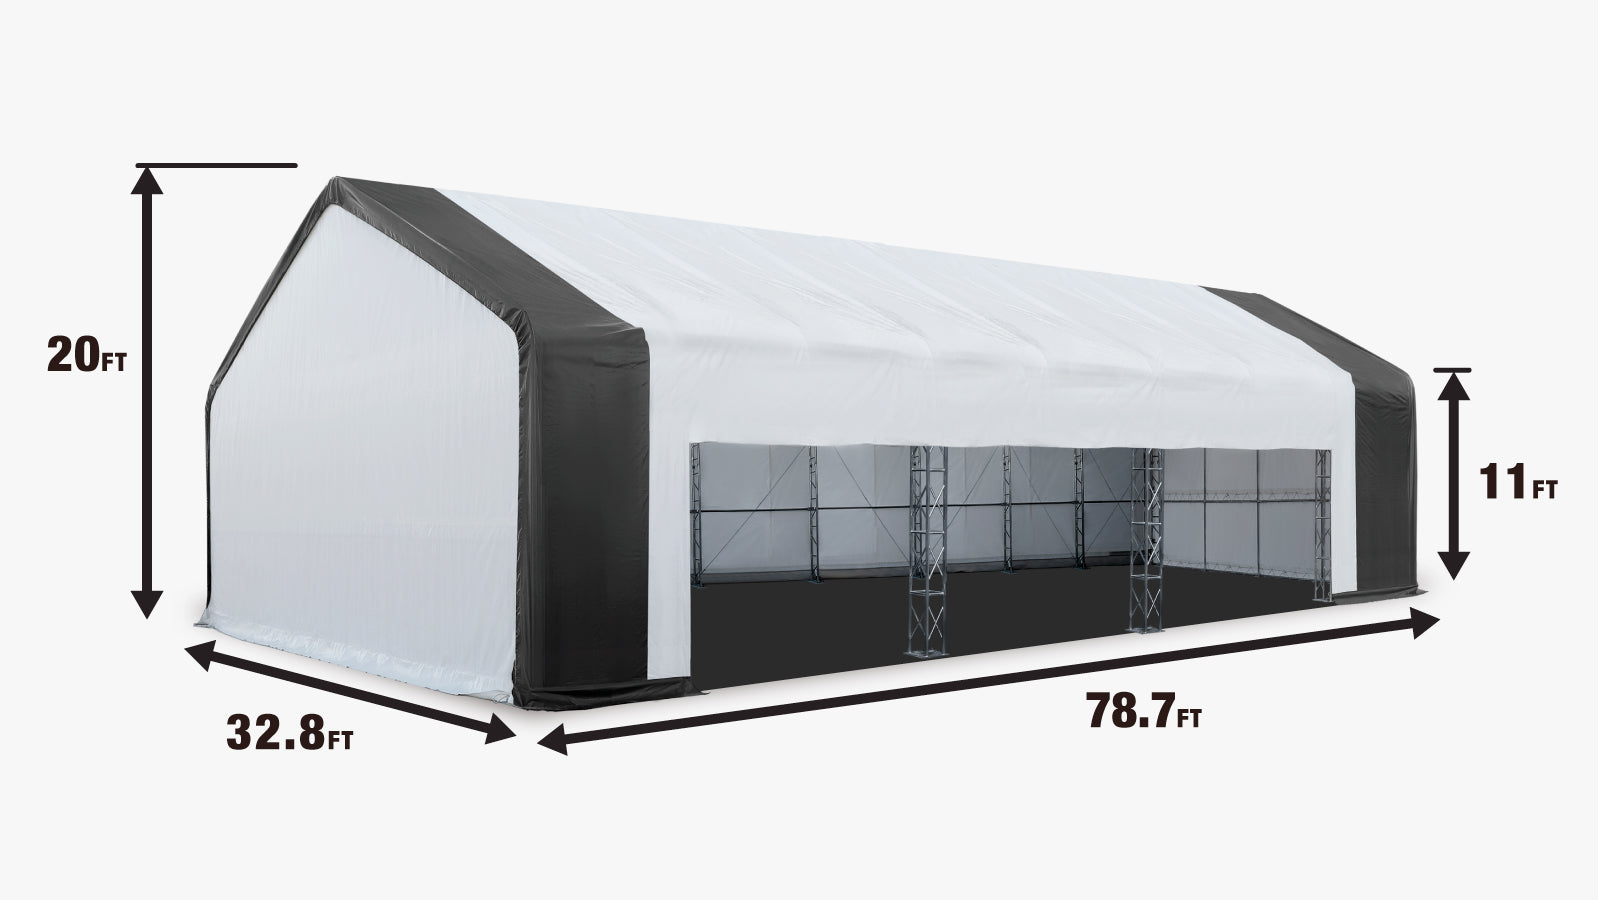 TMG Industrial 80’ x 33’ Dual Truss Storage Shelter Workshop, (3) 19’ Wide Drive-Through Openings, Scaffolding-Style Door Frame Support, TMG-DT3380-specifications-image